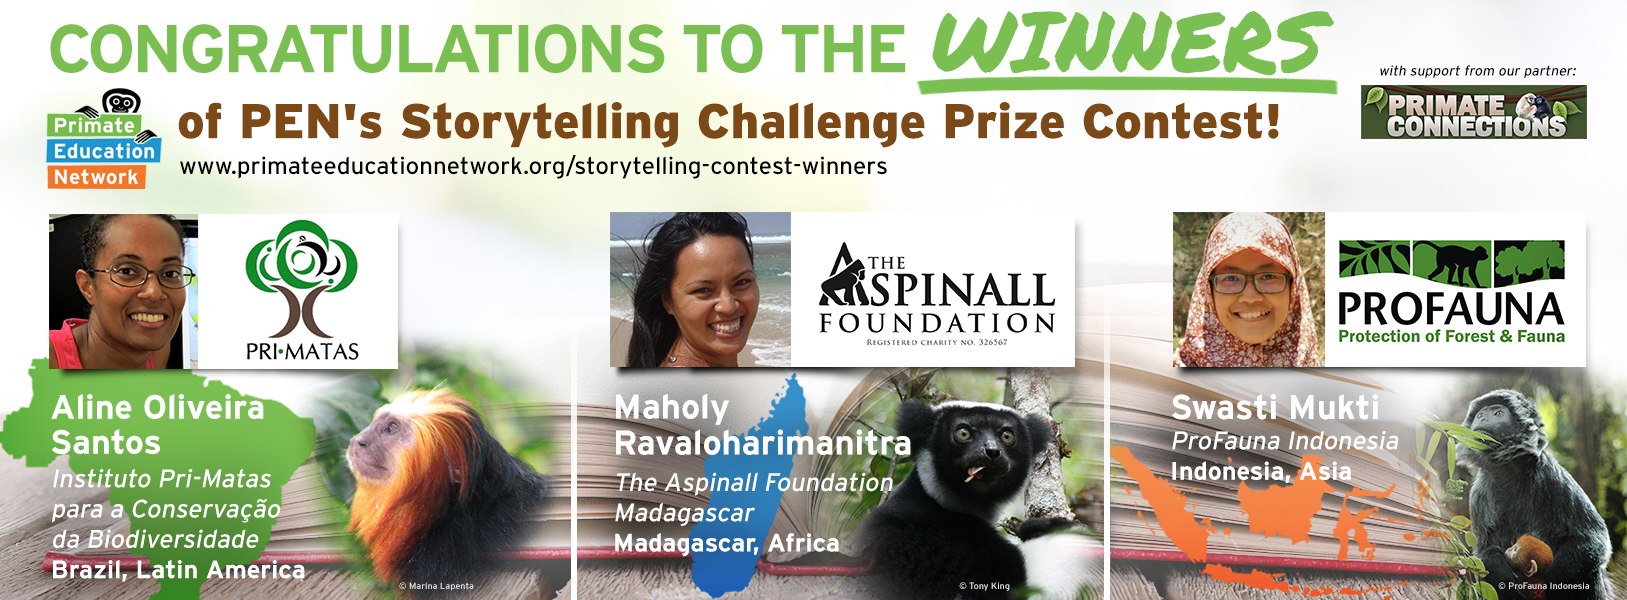 Storytelling Challenge Prize Contest Winners